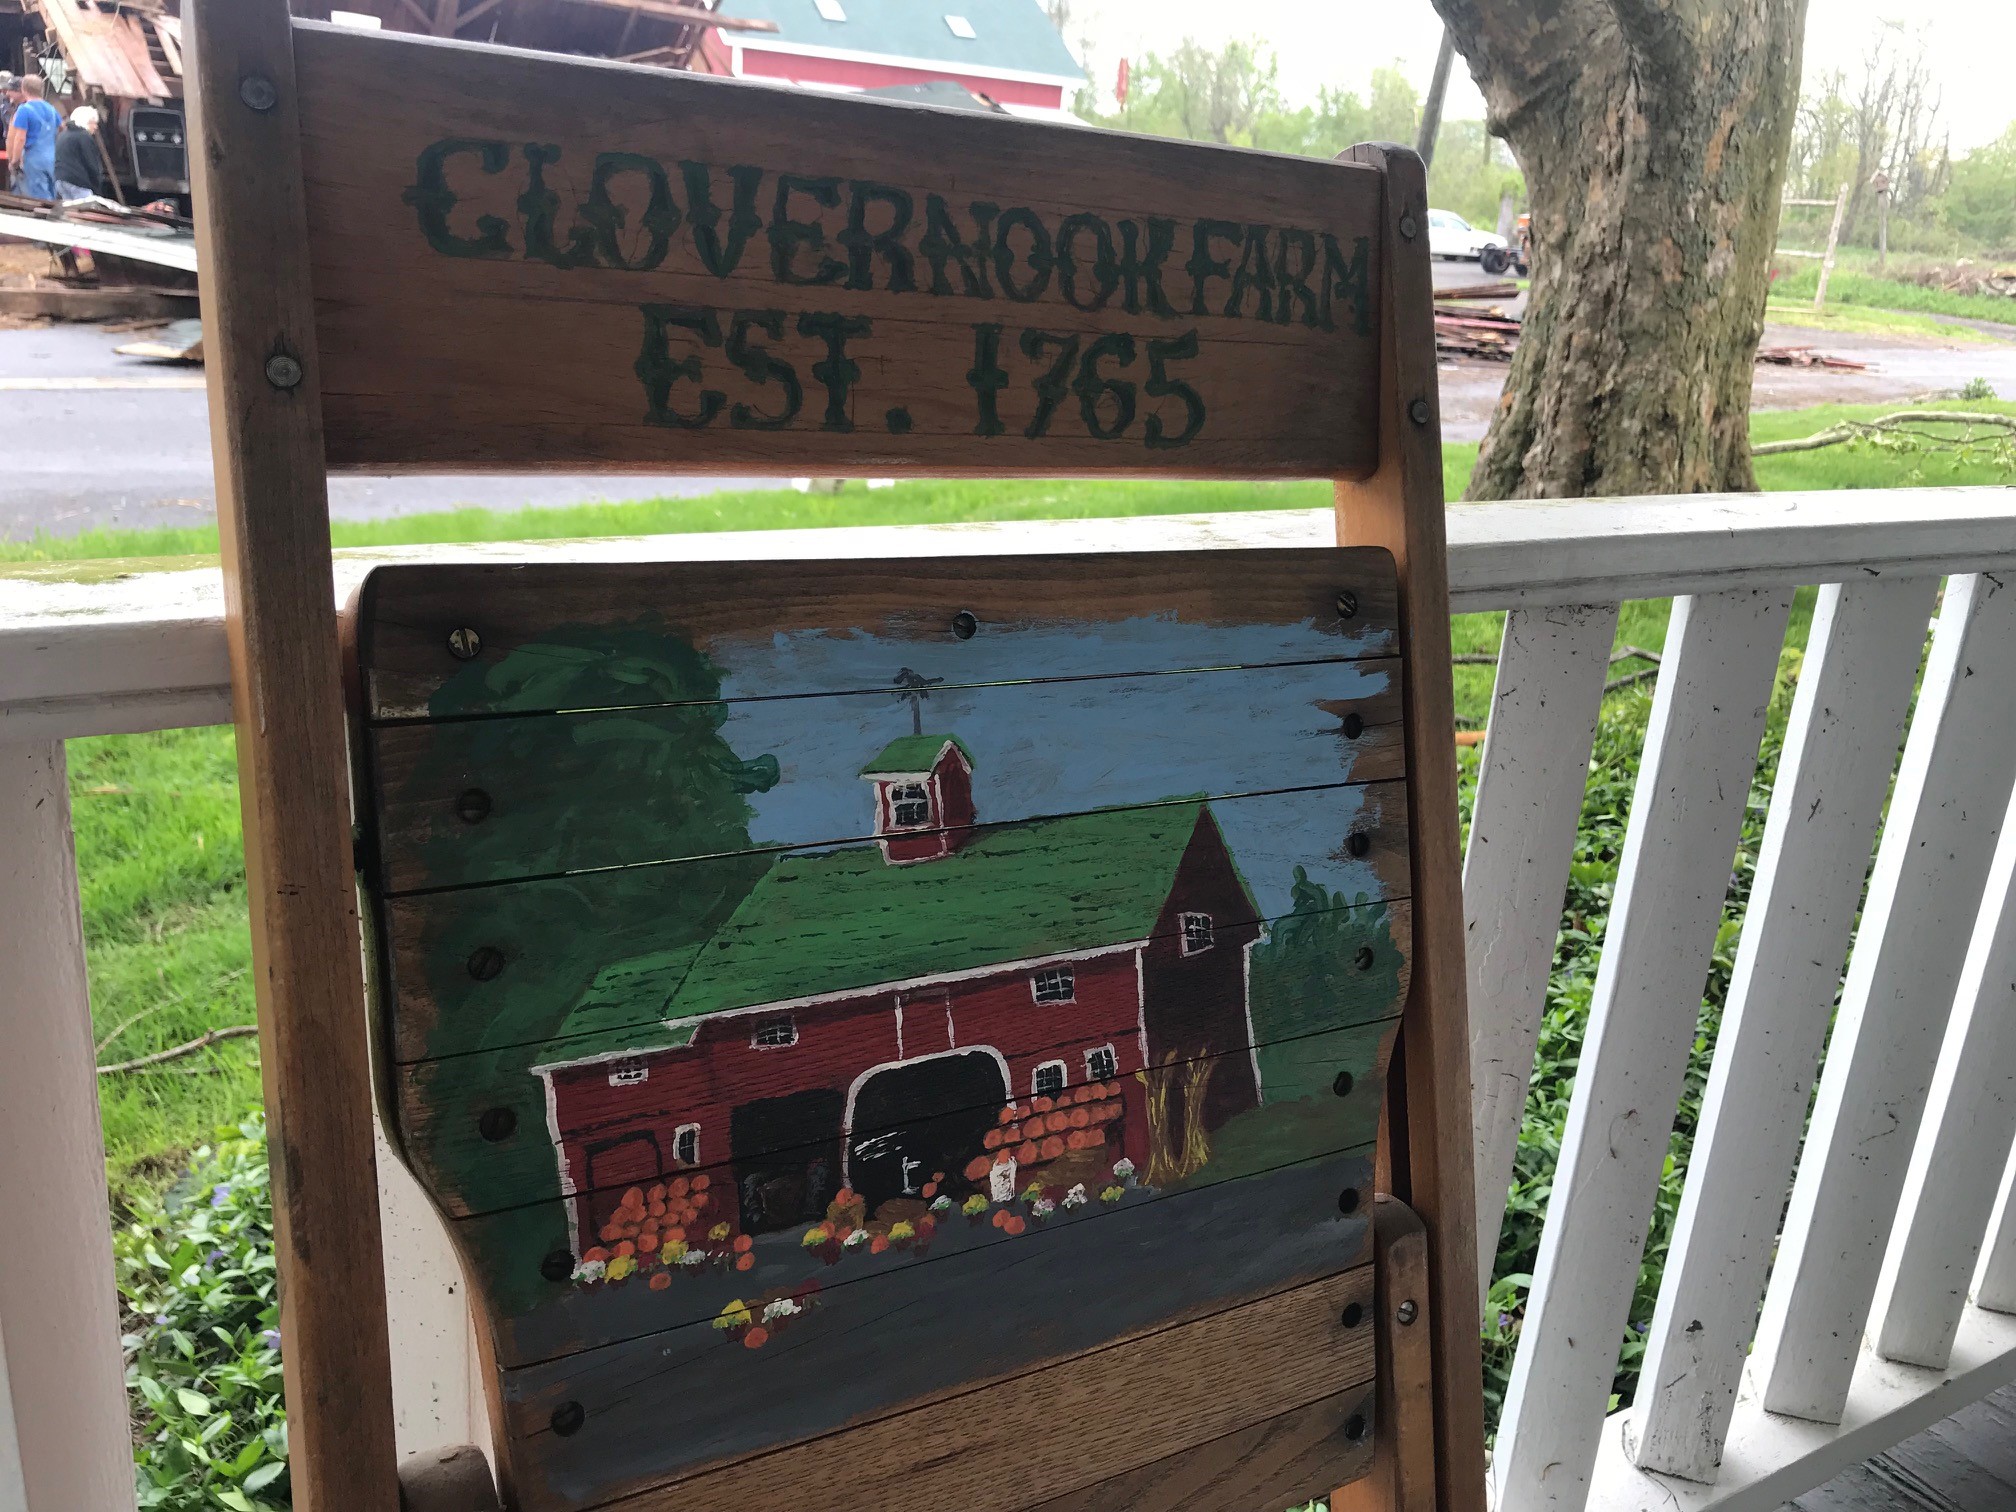 Clover Nook Farm in Bethany Sustains Extensive Damage NBC Connecticut